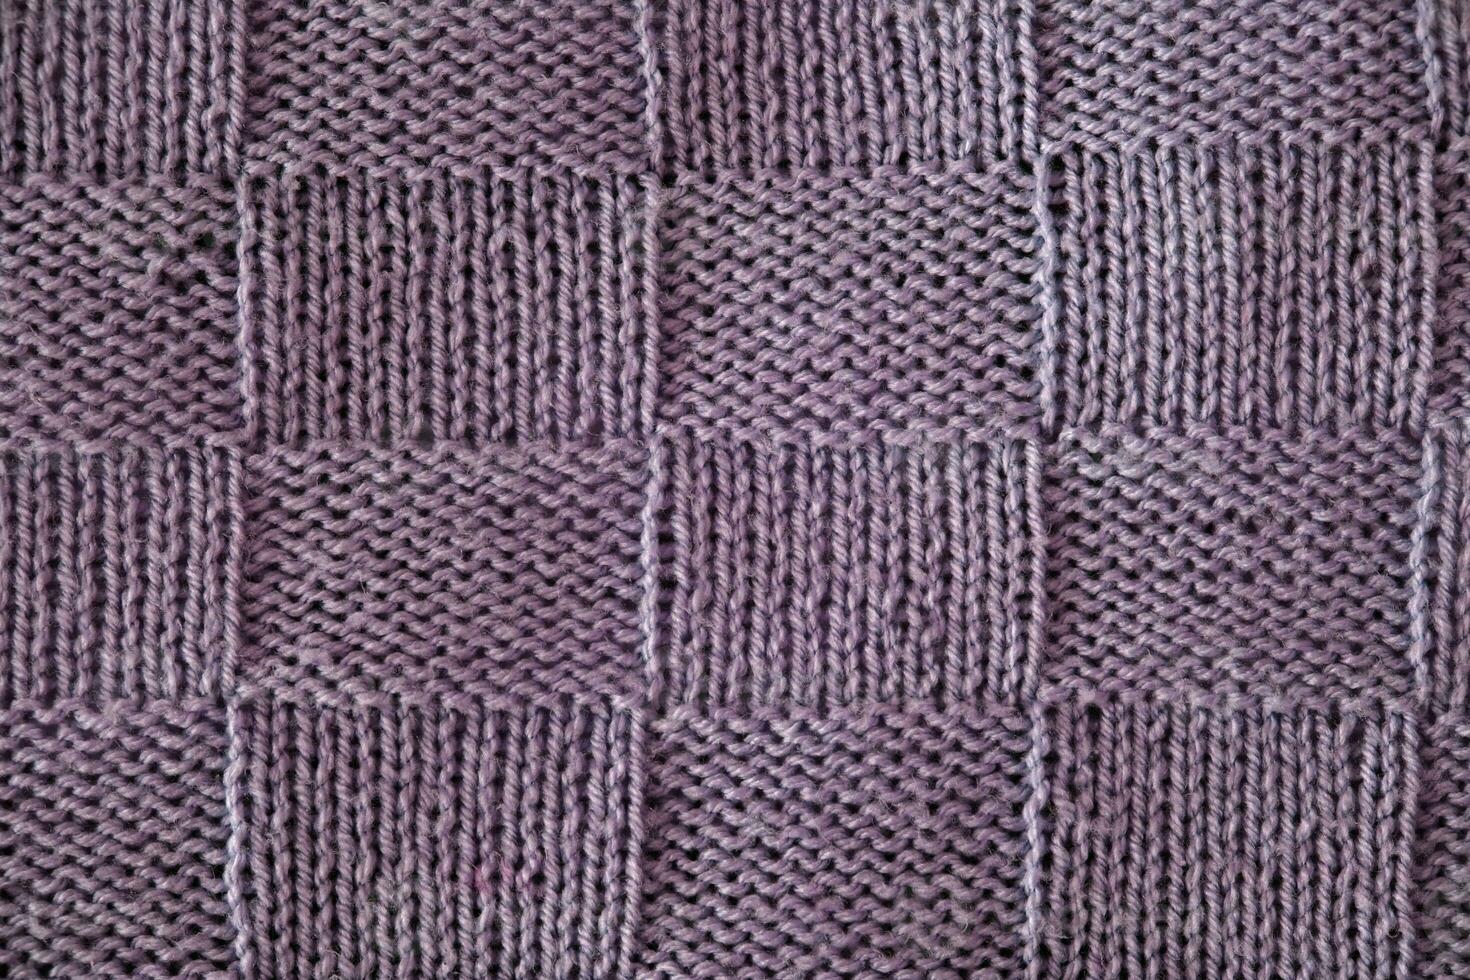 Unusual abstract knitted chess pattern background texture. Top view, close-up. Handmade knitting wool photo